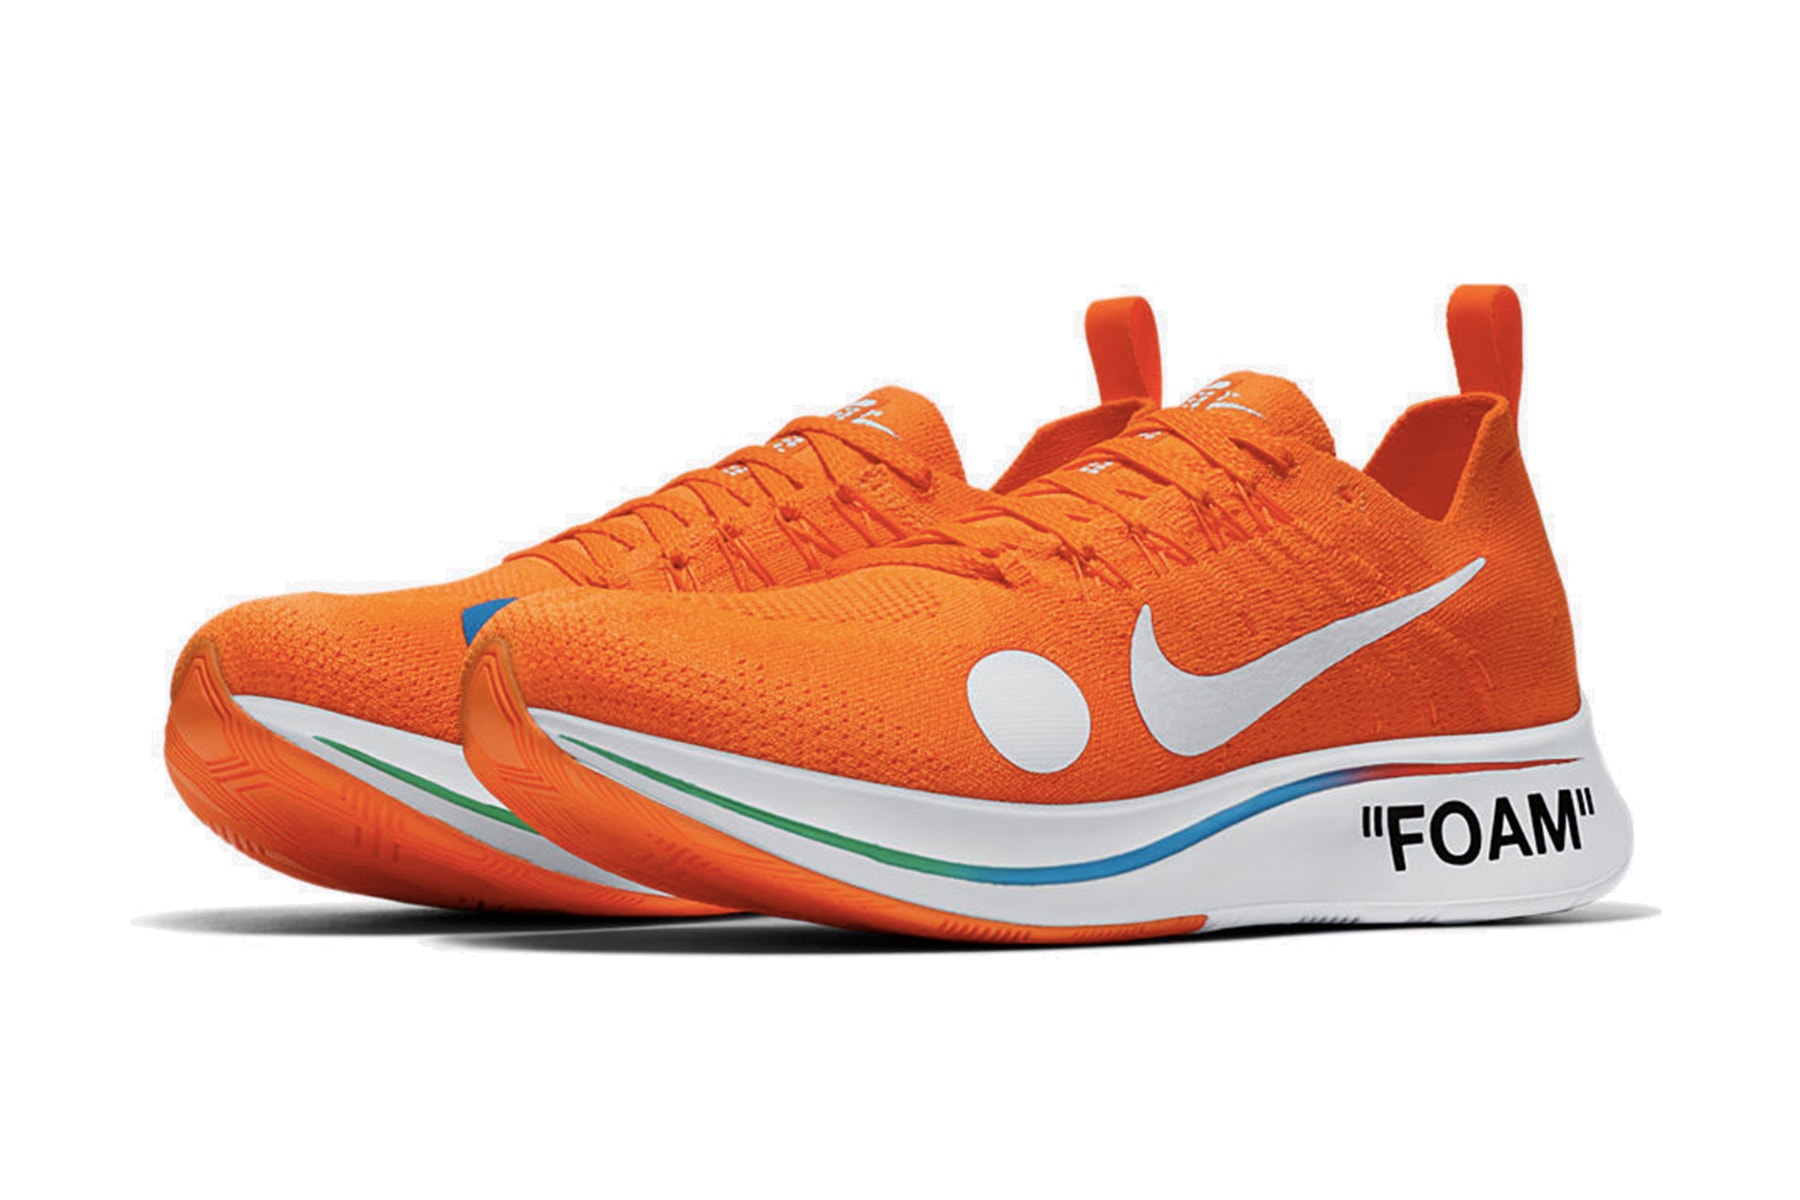 Off-White™ x Nike Zoom Fly Mercurial Flyknit の詳細情報が SNKRS 上に登場